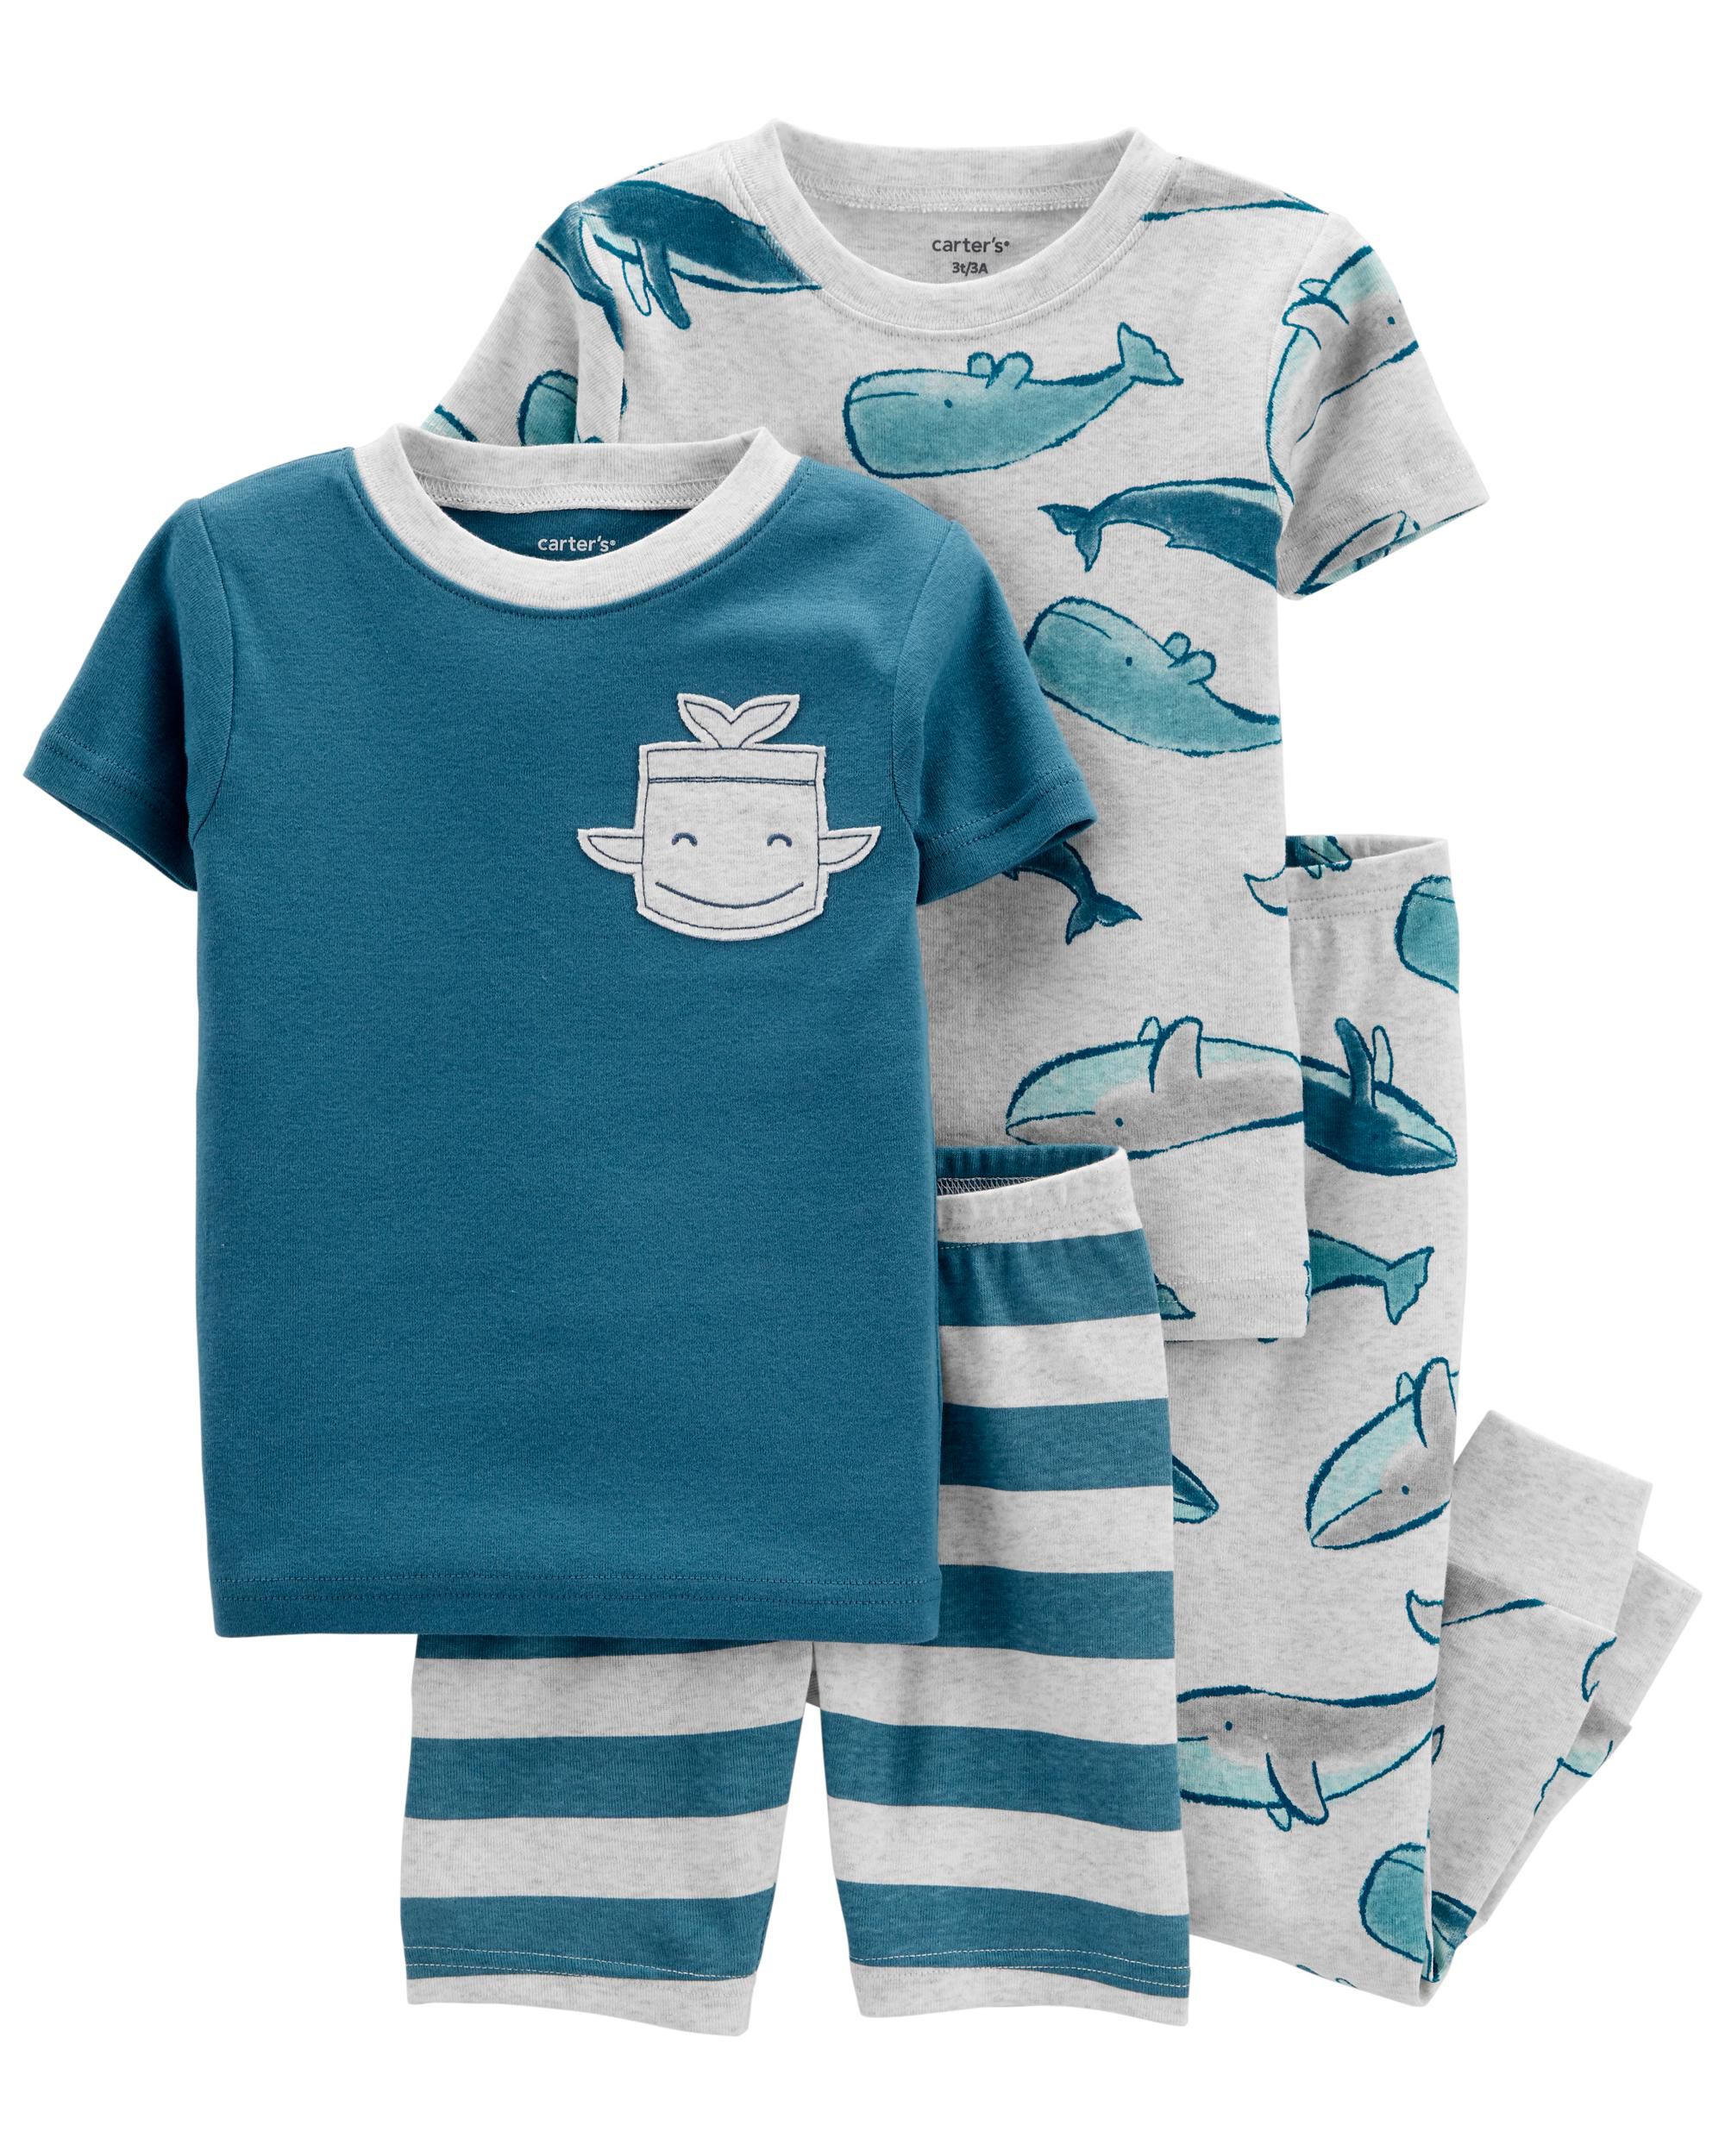 Details about   NEW CARTERS BOYS 4 PIECE SLEEPWEAR PAJAMA SET GREEN BLUE WHALES SIZE 12 MONTH 